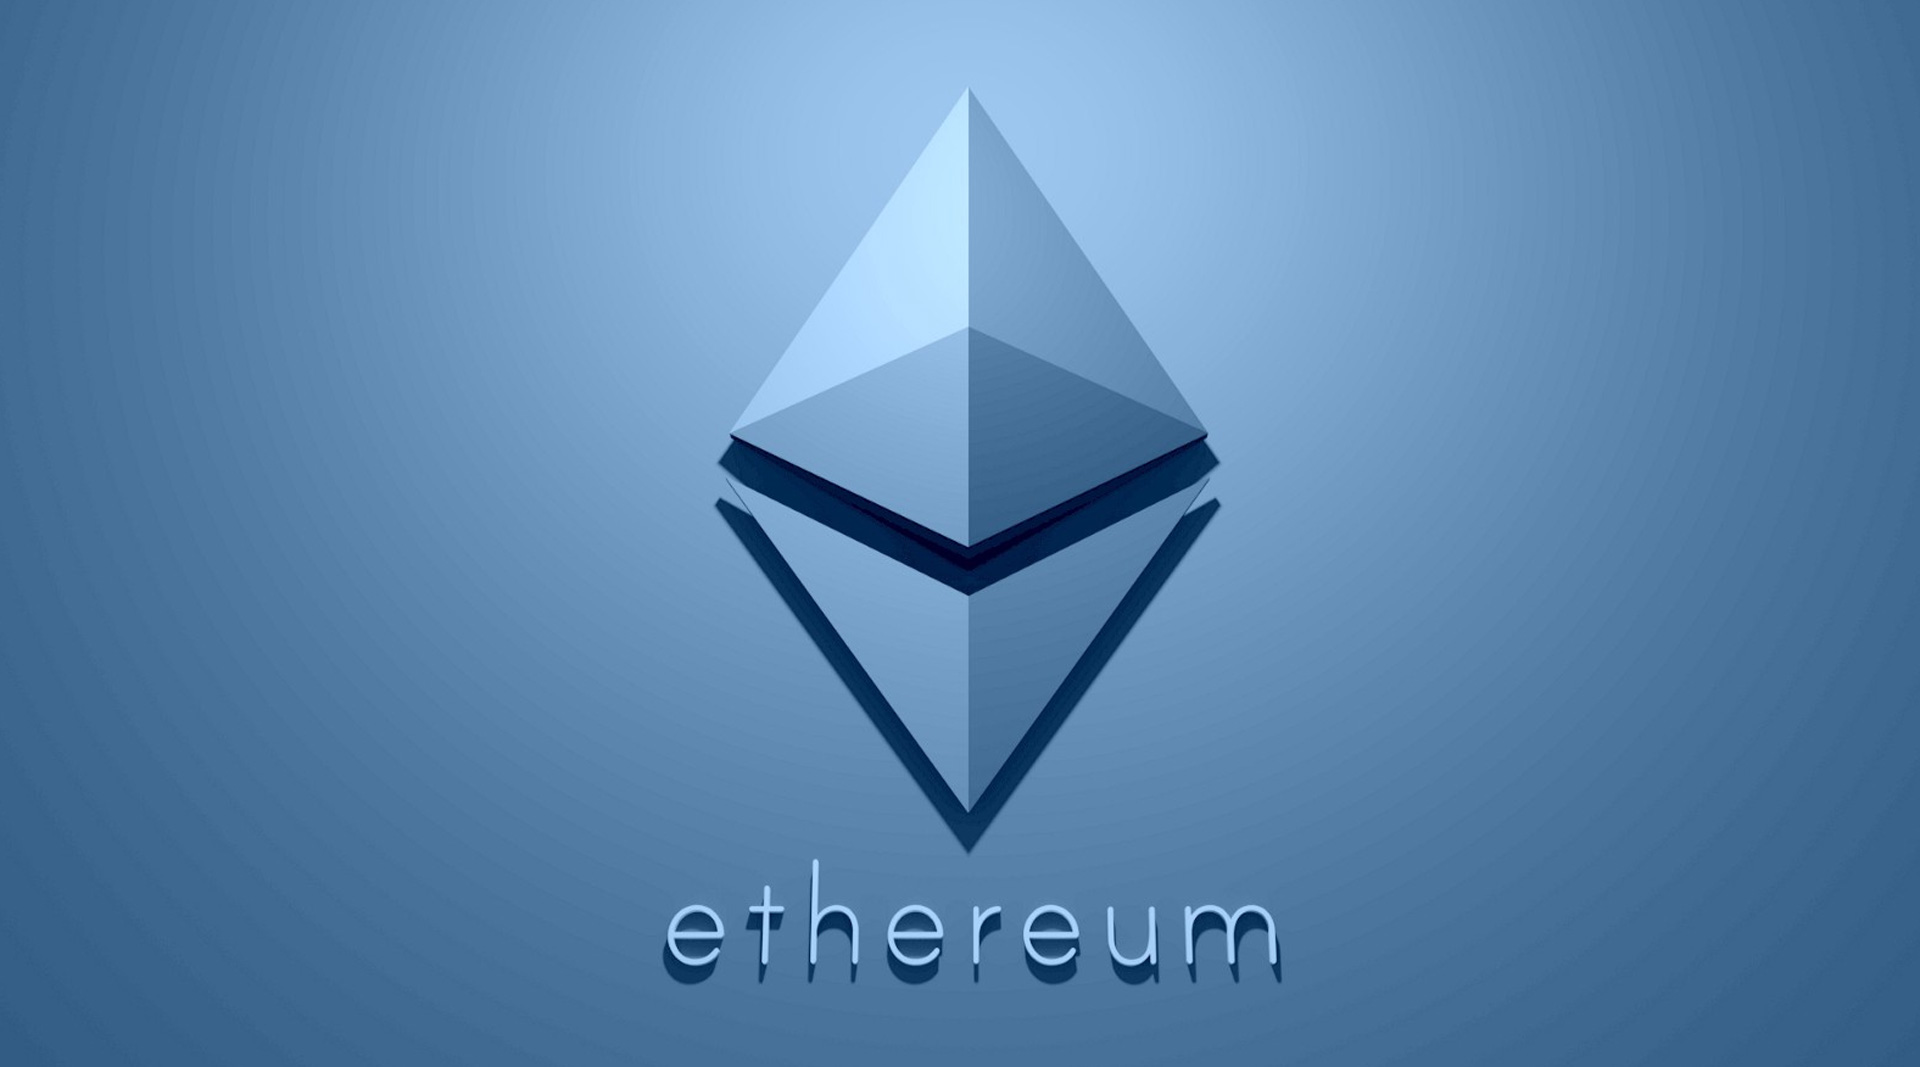 What will be the Ethereum price prediction after merge?